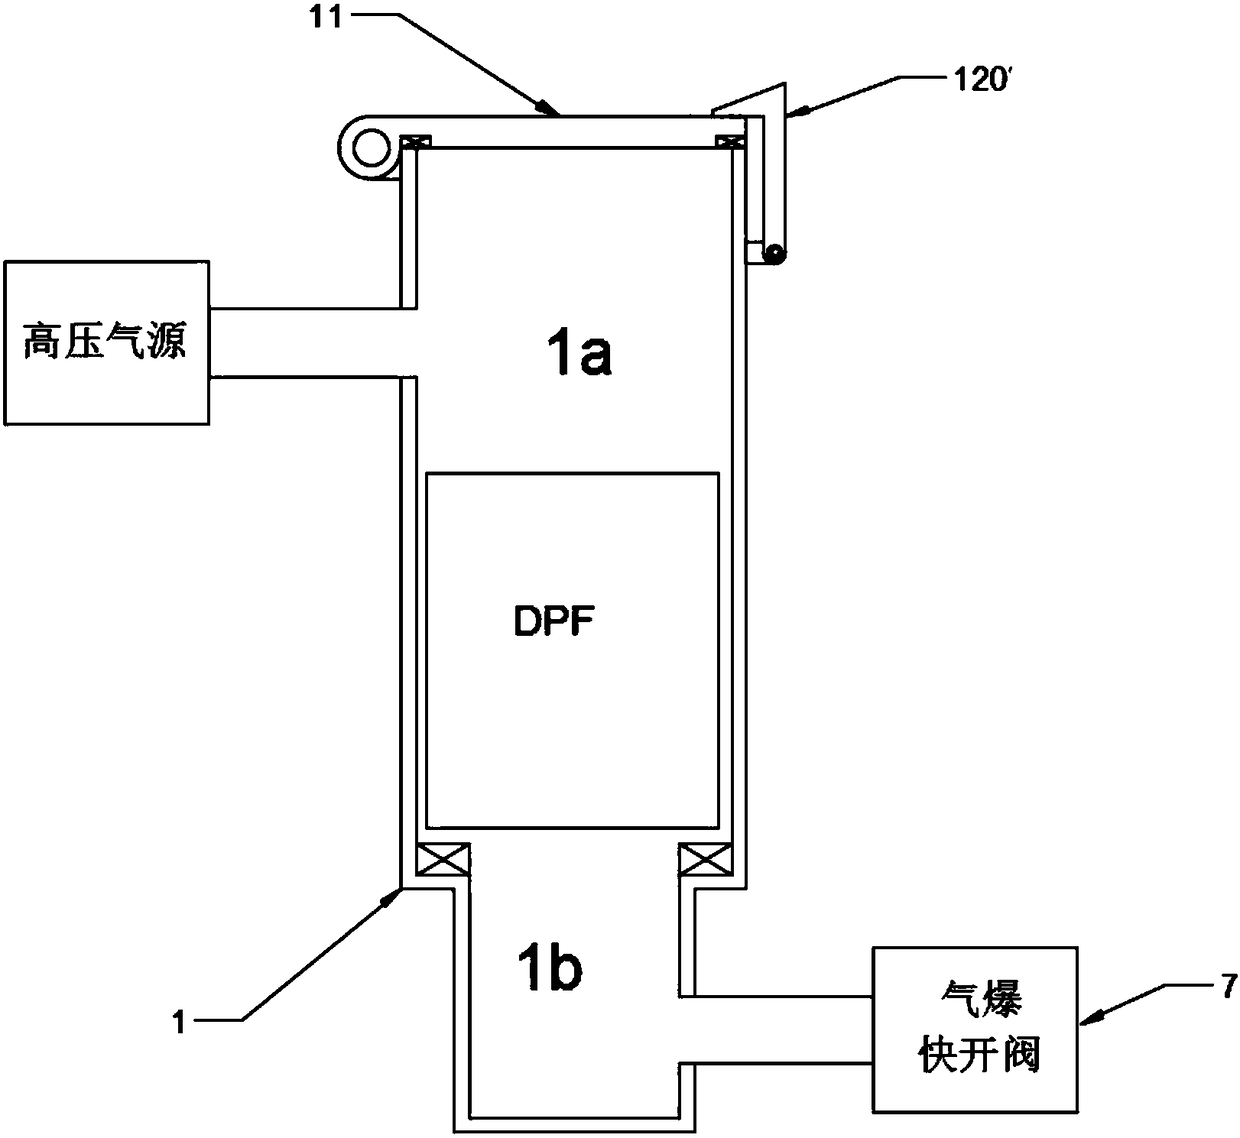 DPF (Diesel Particulate Filter) installing frame of DPF cleaning device